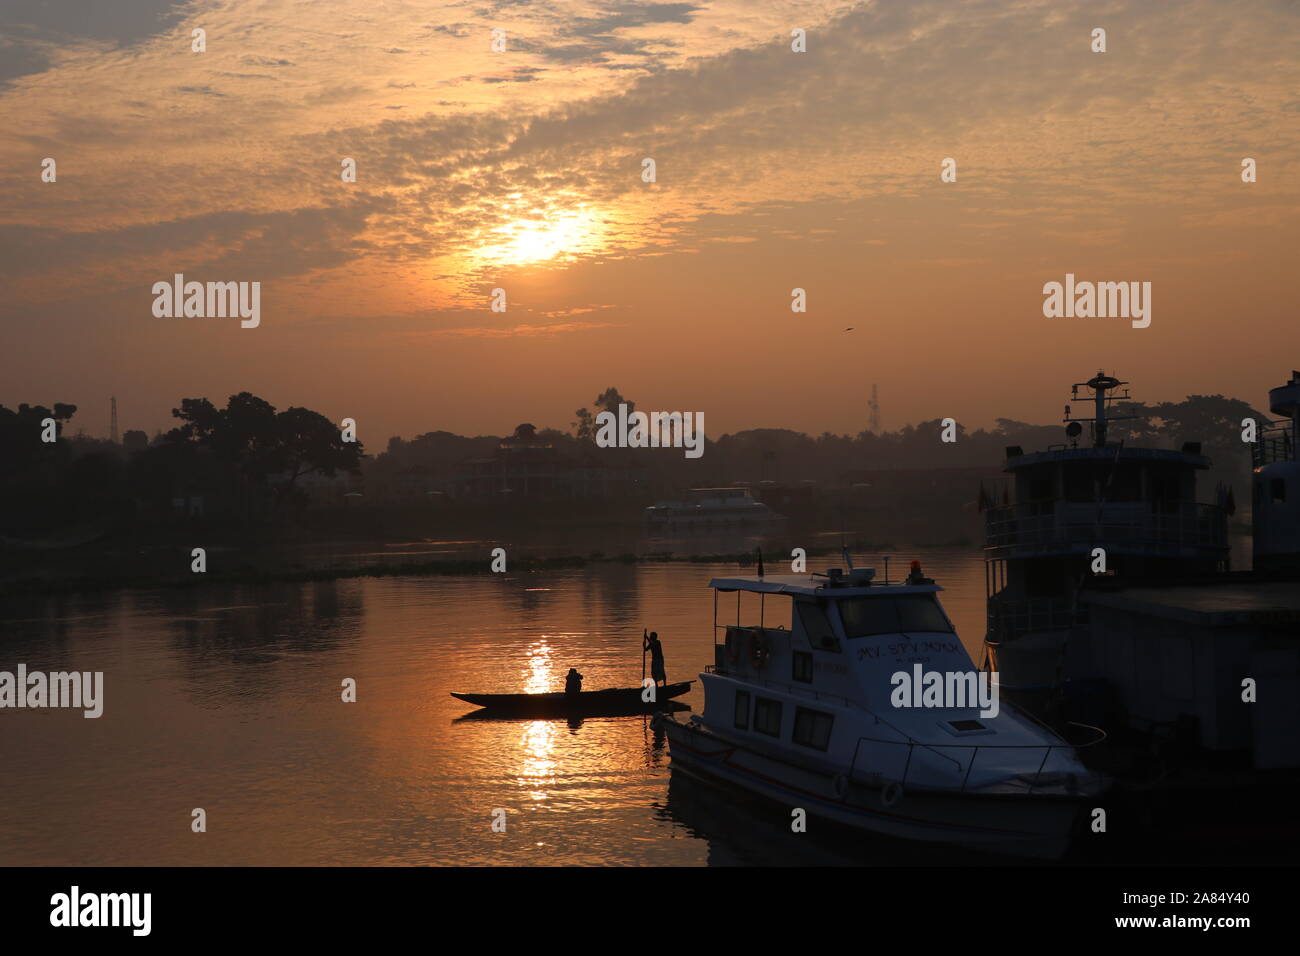 Catching fish 01nov2019 Catching fish in the winter morning image from bangladesh, Asia .Nazmul Islam/alamy live news Stock Photo